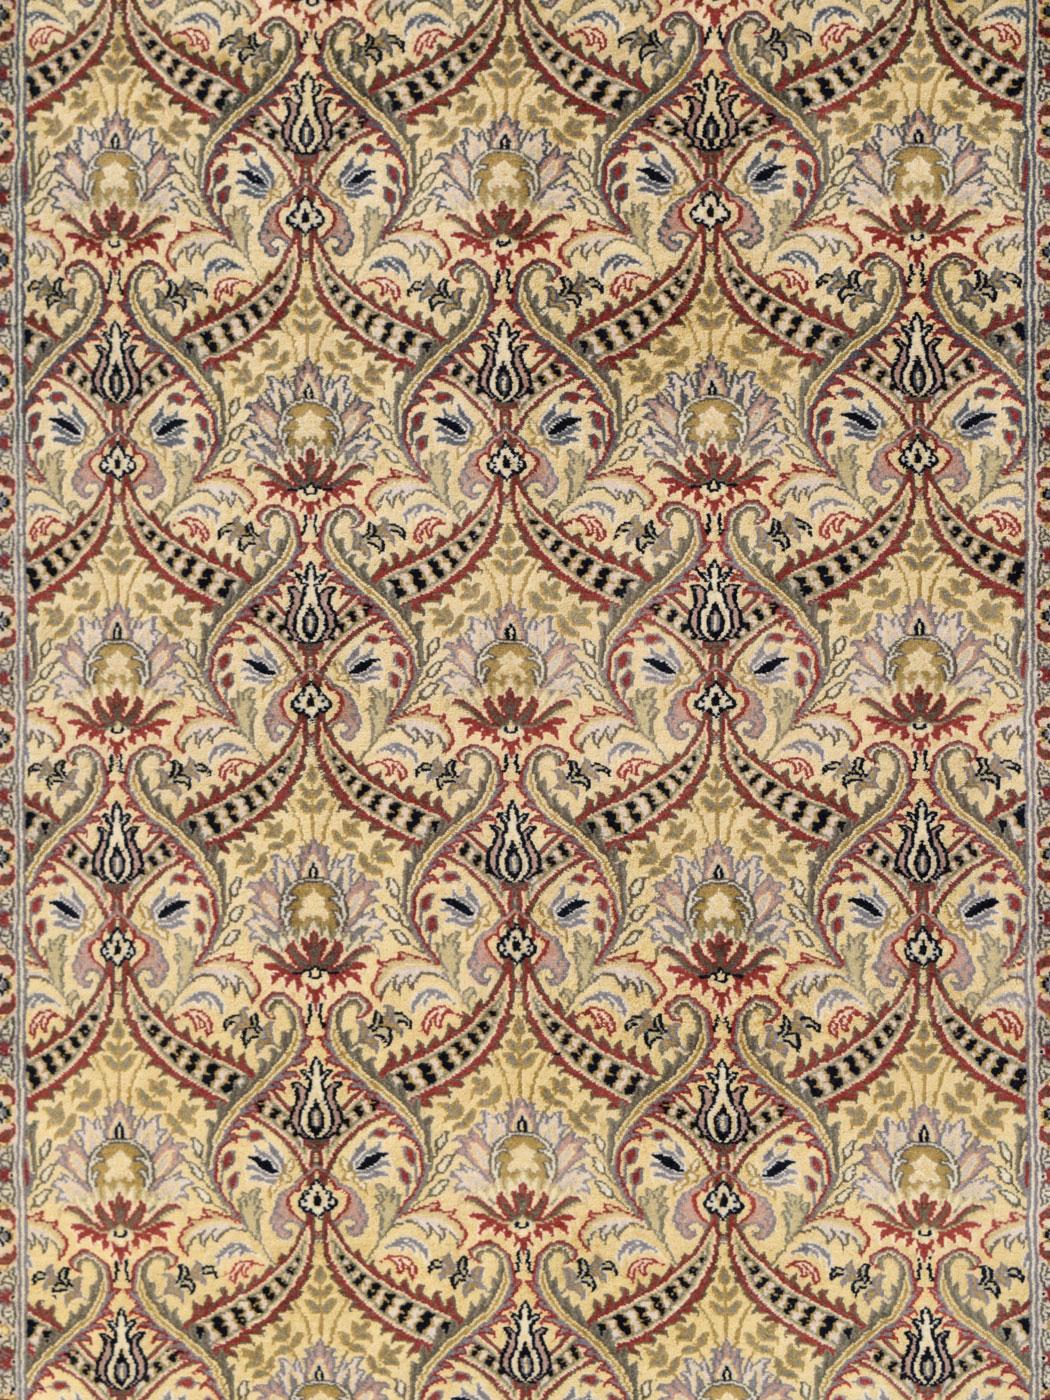 With a warm golden background and an all-over green garland design, this Semnan-inspired carpet was woven in Pakistan and measures 4 ’x 6’. The Semnan design is composed of blooming flower motifs, encompassed by red and green detail garlands. Poetic